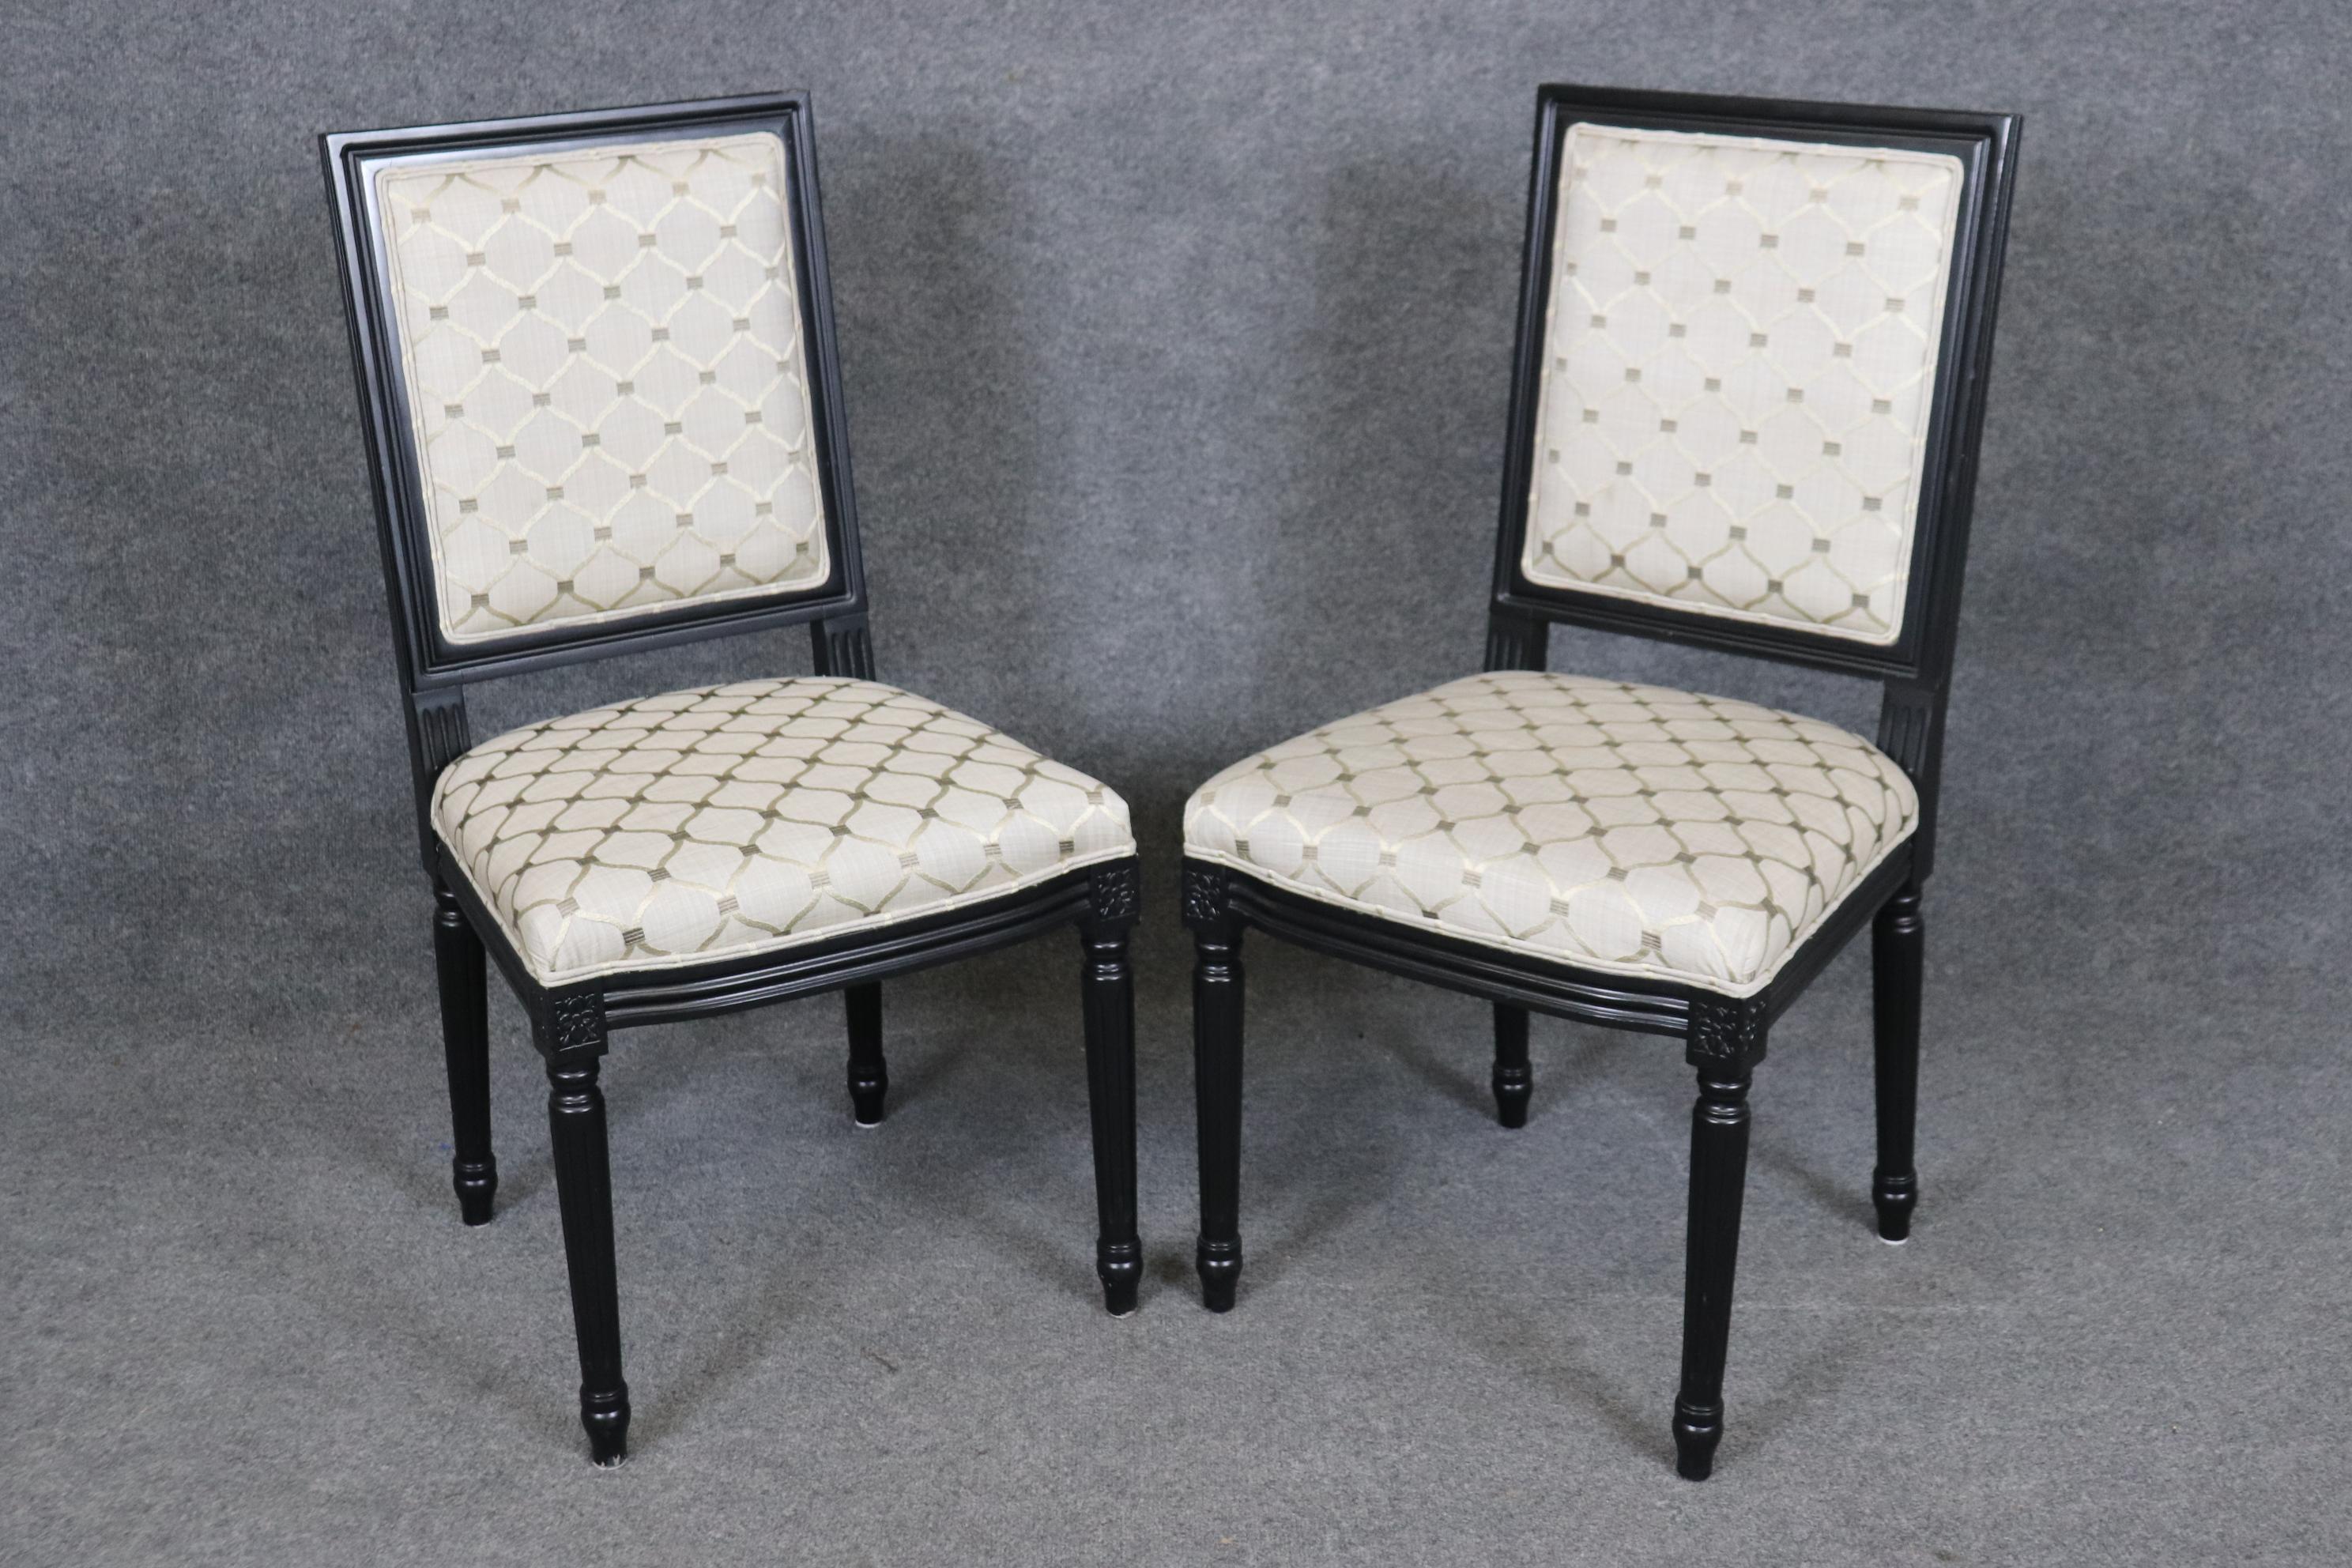 This is a chic set of 8 ebonized black lacquered dining chairs in the Directoire or Louis XVI style. The chairs are in good used condition and may show signs of age or minor stains or issues but they are used. The frames are gorgeous and being